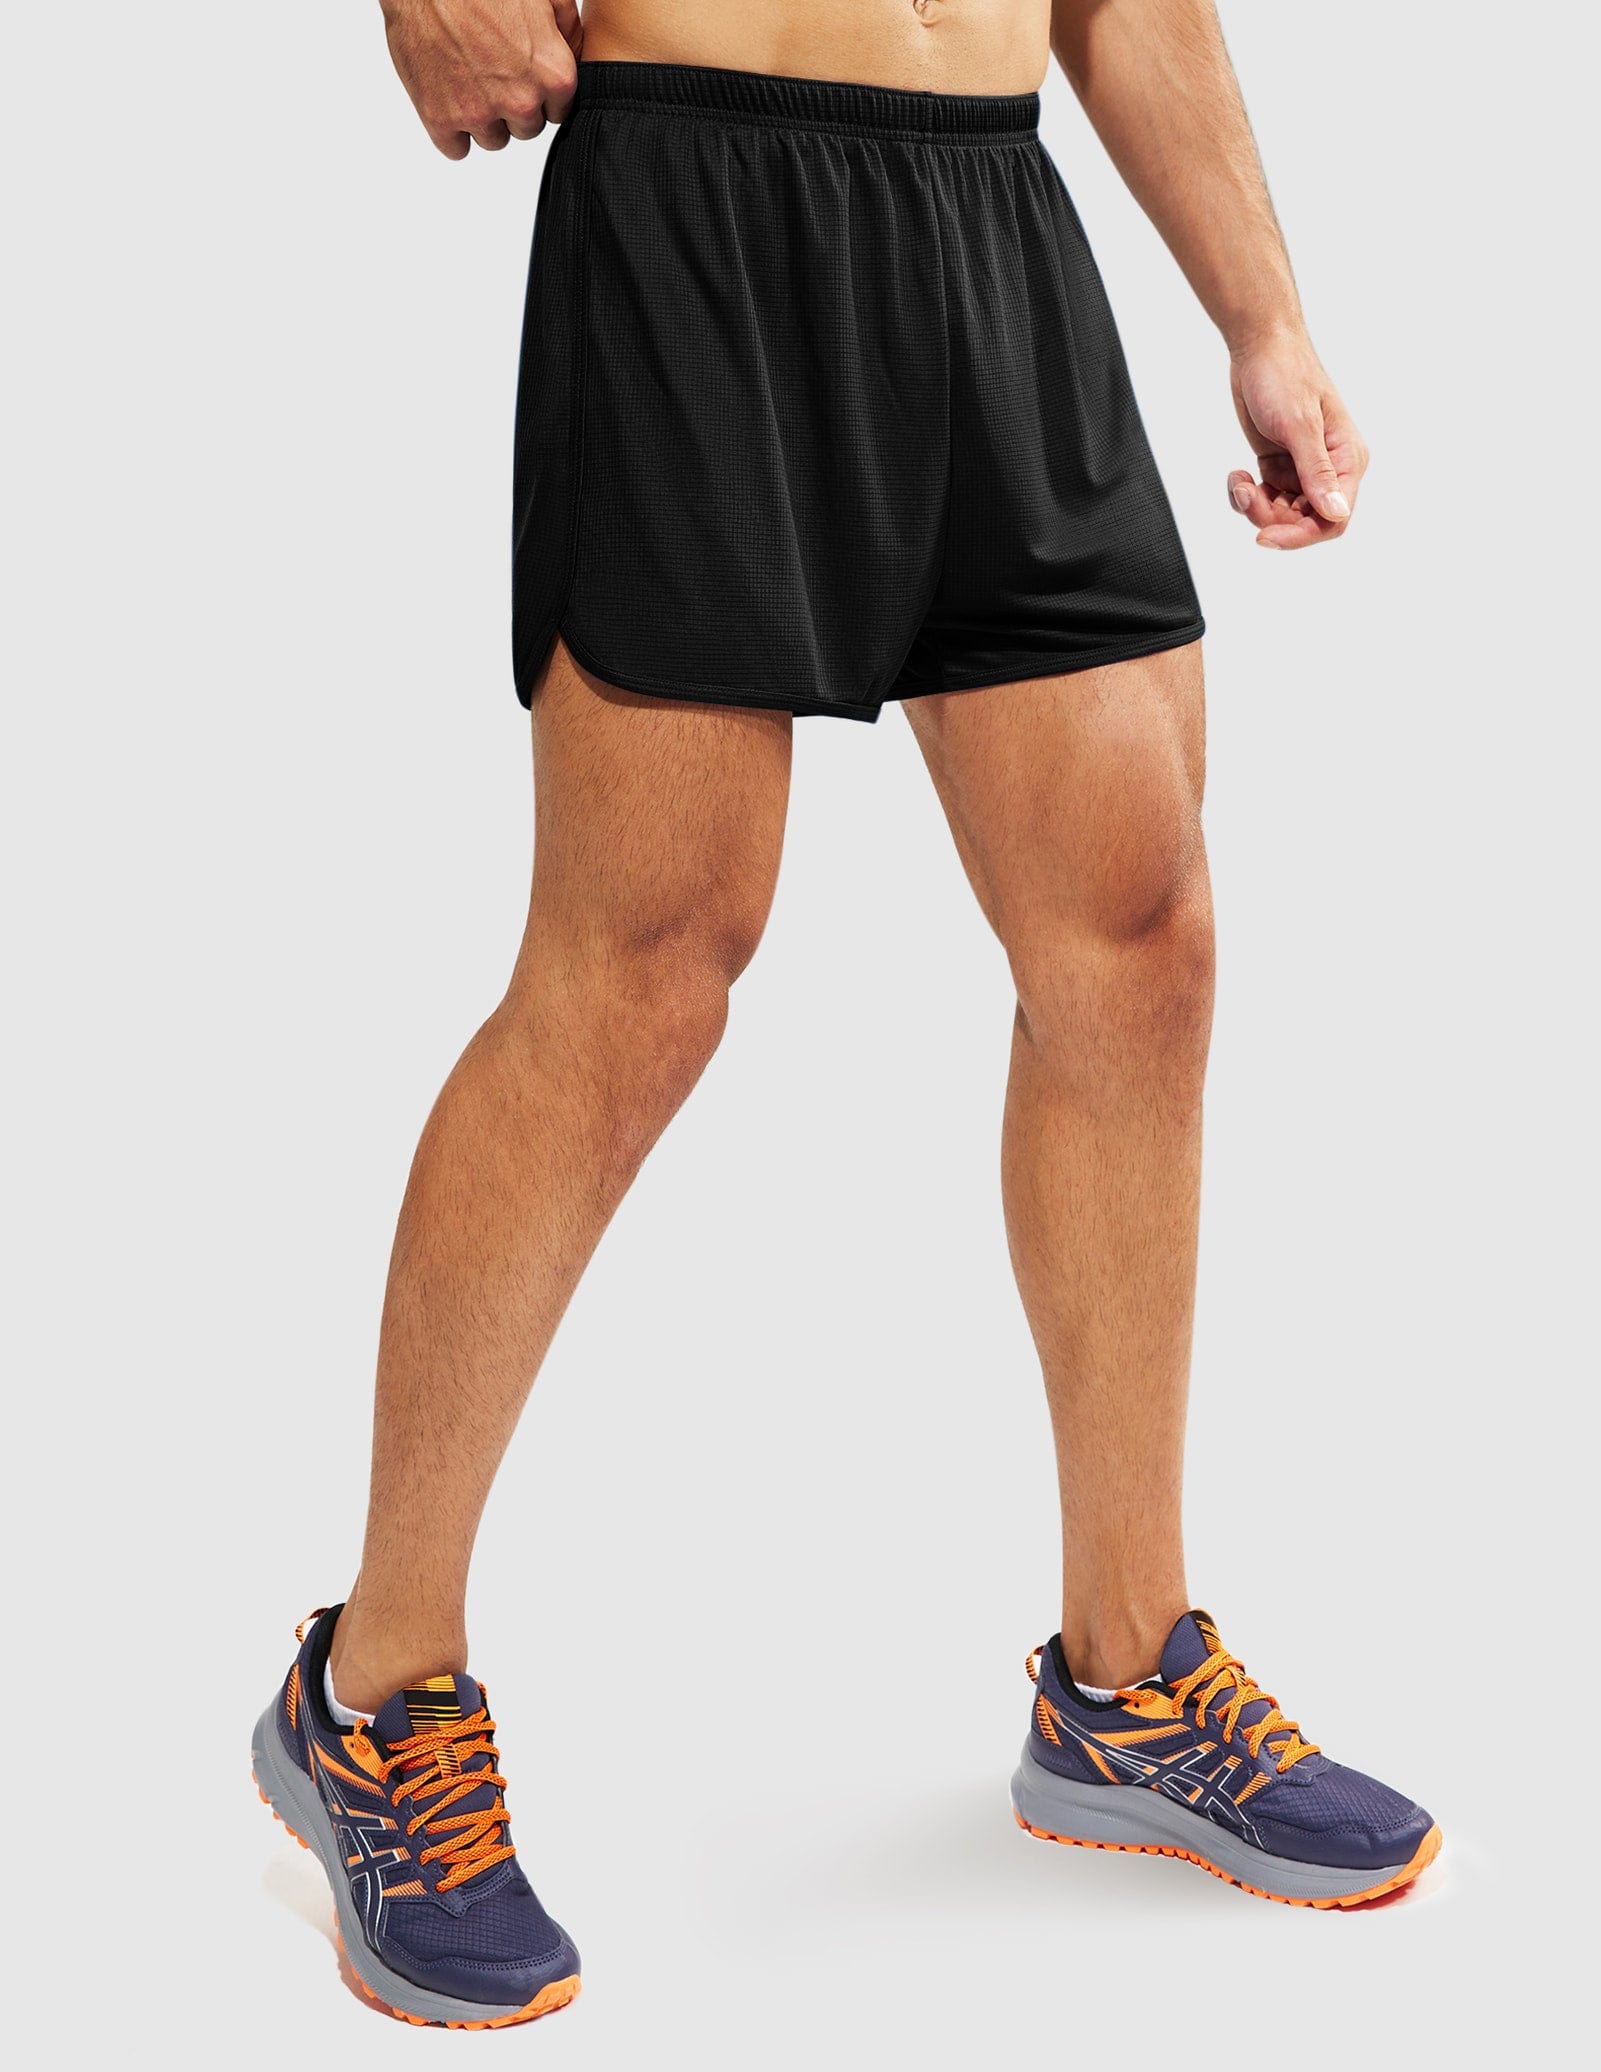 Men's 3-Inch Quick Dry Running Shorts with Liner Men's Shorts Black / XS MIER